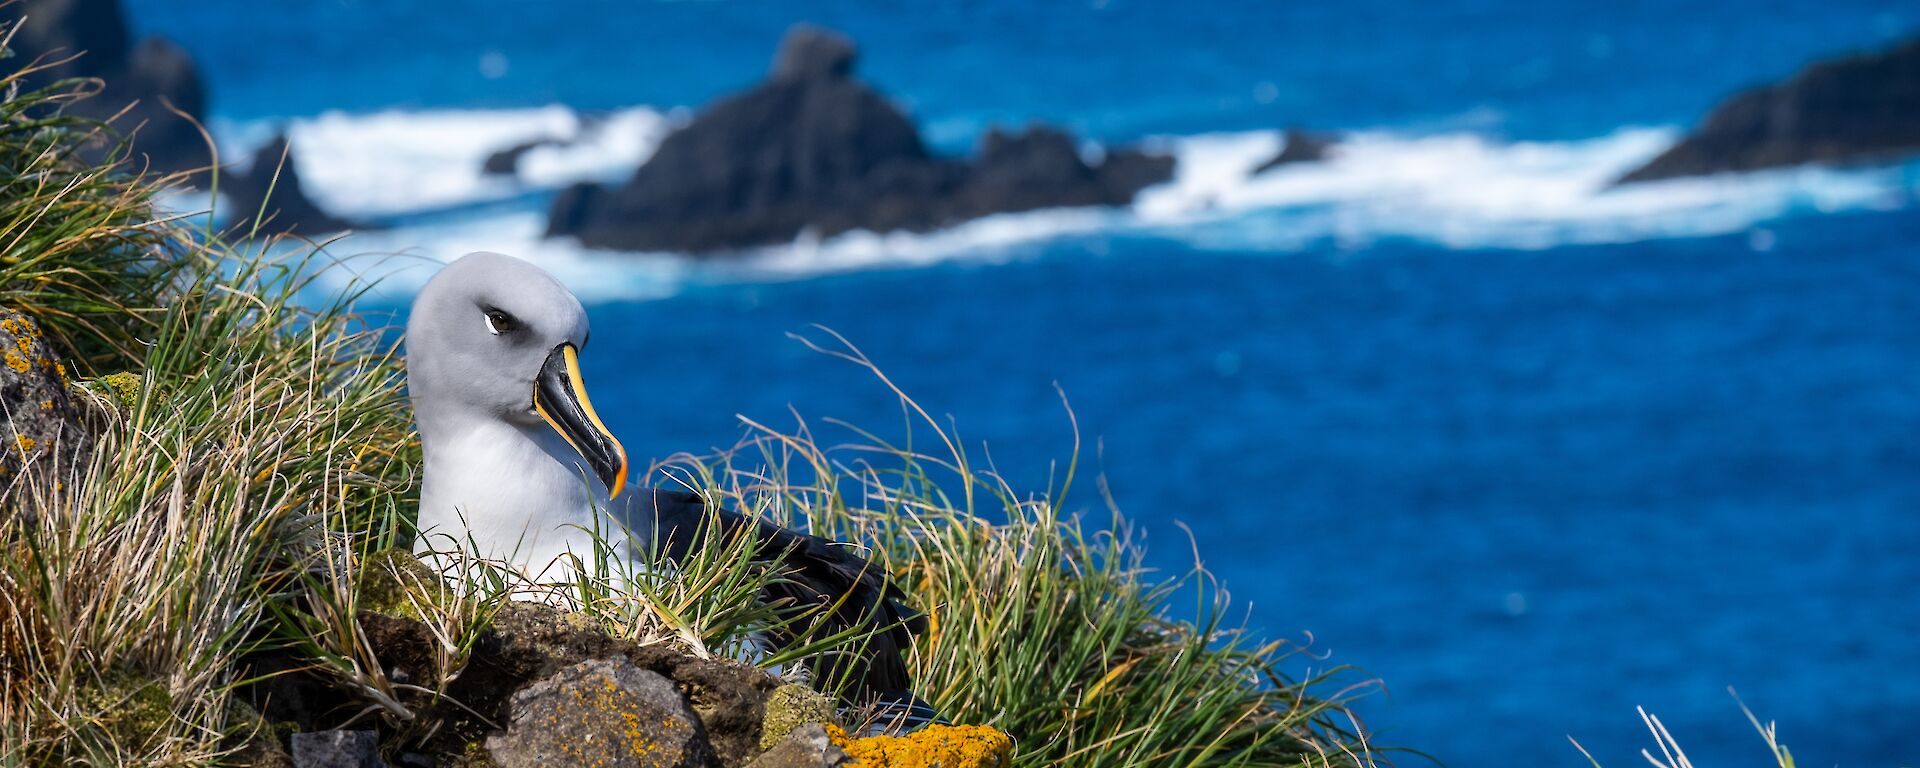 A regal white bird with a yellow strip on its beak, sits in a nest on the side of a cliff.